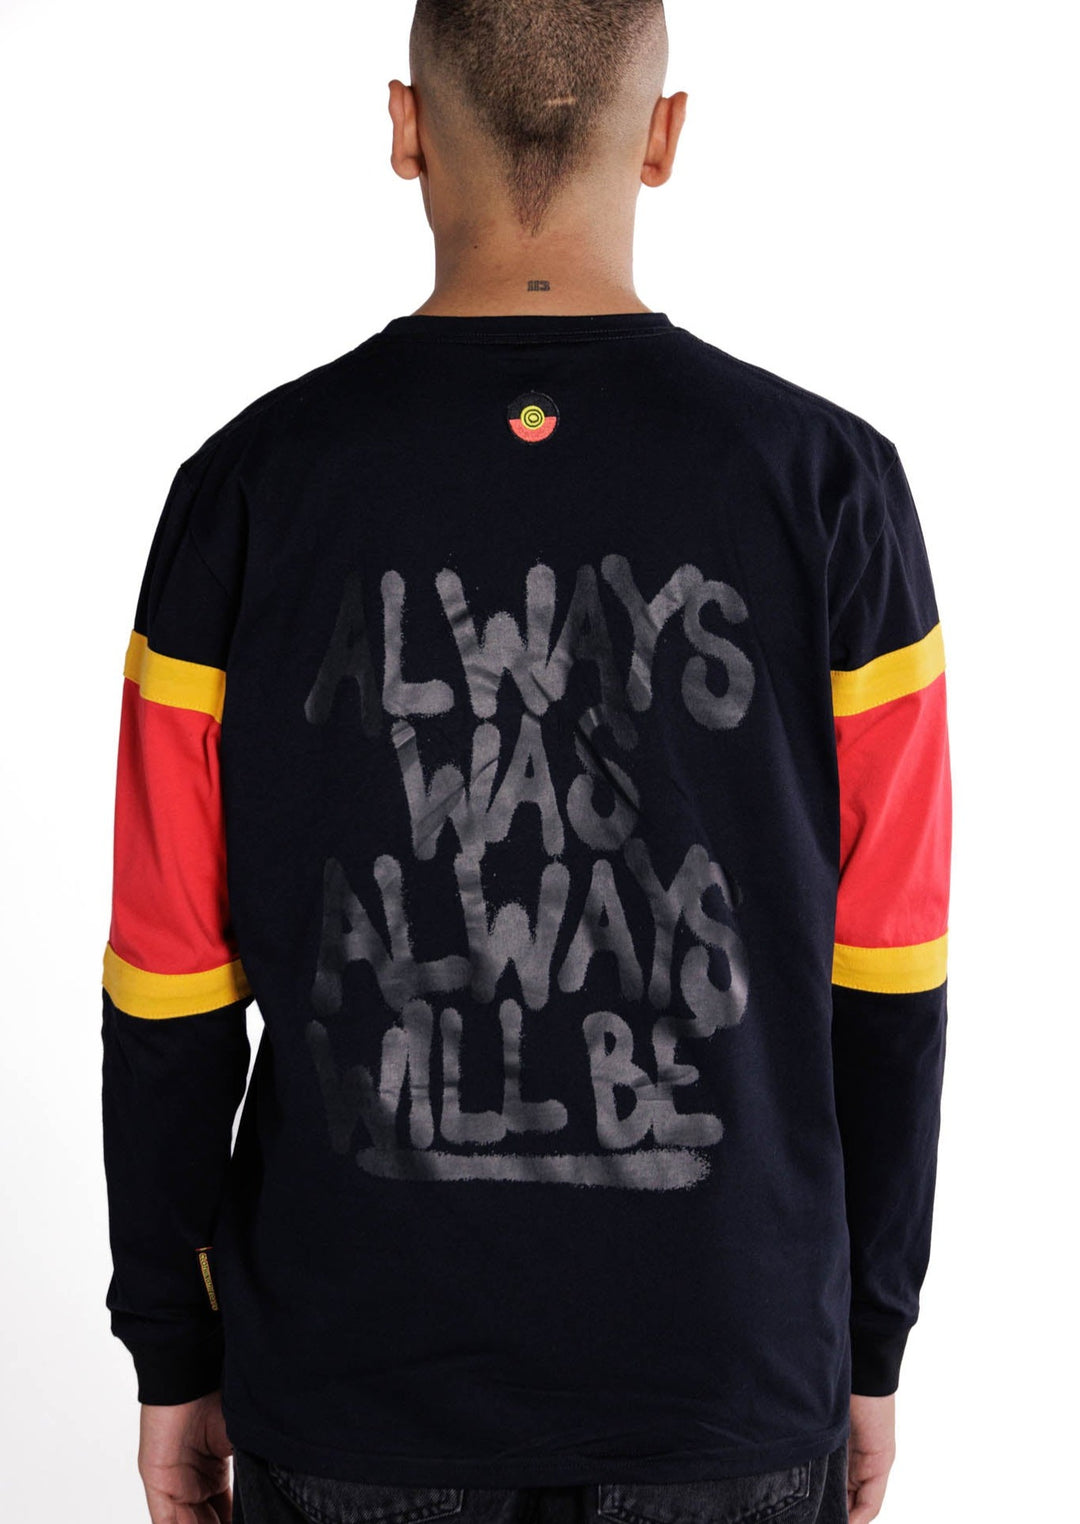 Clothing The Gaps. Black Power Longsleeve. Red, black and yellow sleeves. Aboriginal flag outline embroidered in black on the front. On the back of the hoodie a screen printed powerful Aboriginal chant 'Always Was, Always Will Be' looks like it has been sprayed on with a black spray can! The Clothing the Gaps circle logo patch of red, black and yellow just below neckline centred on upper back.